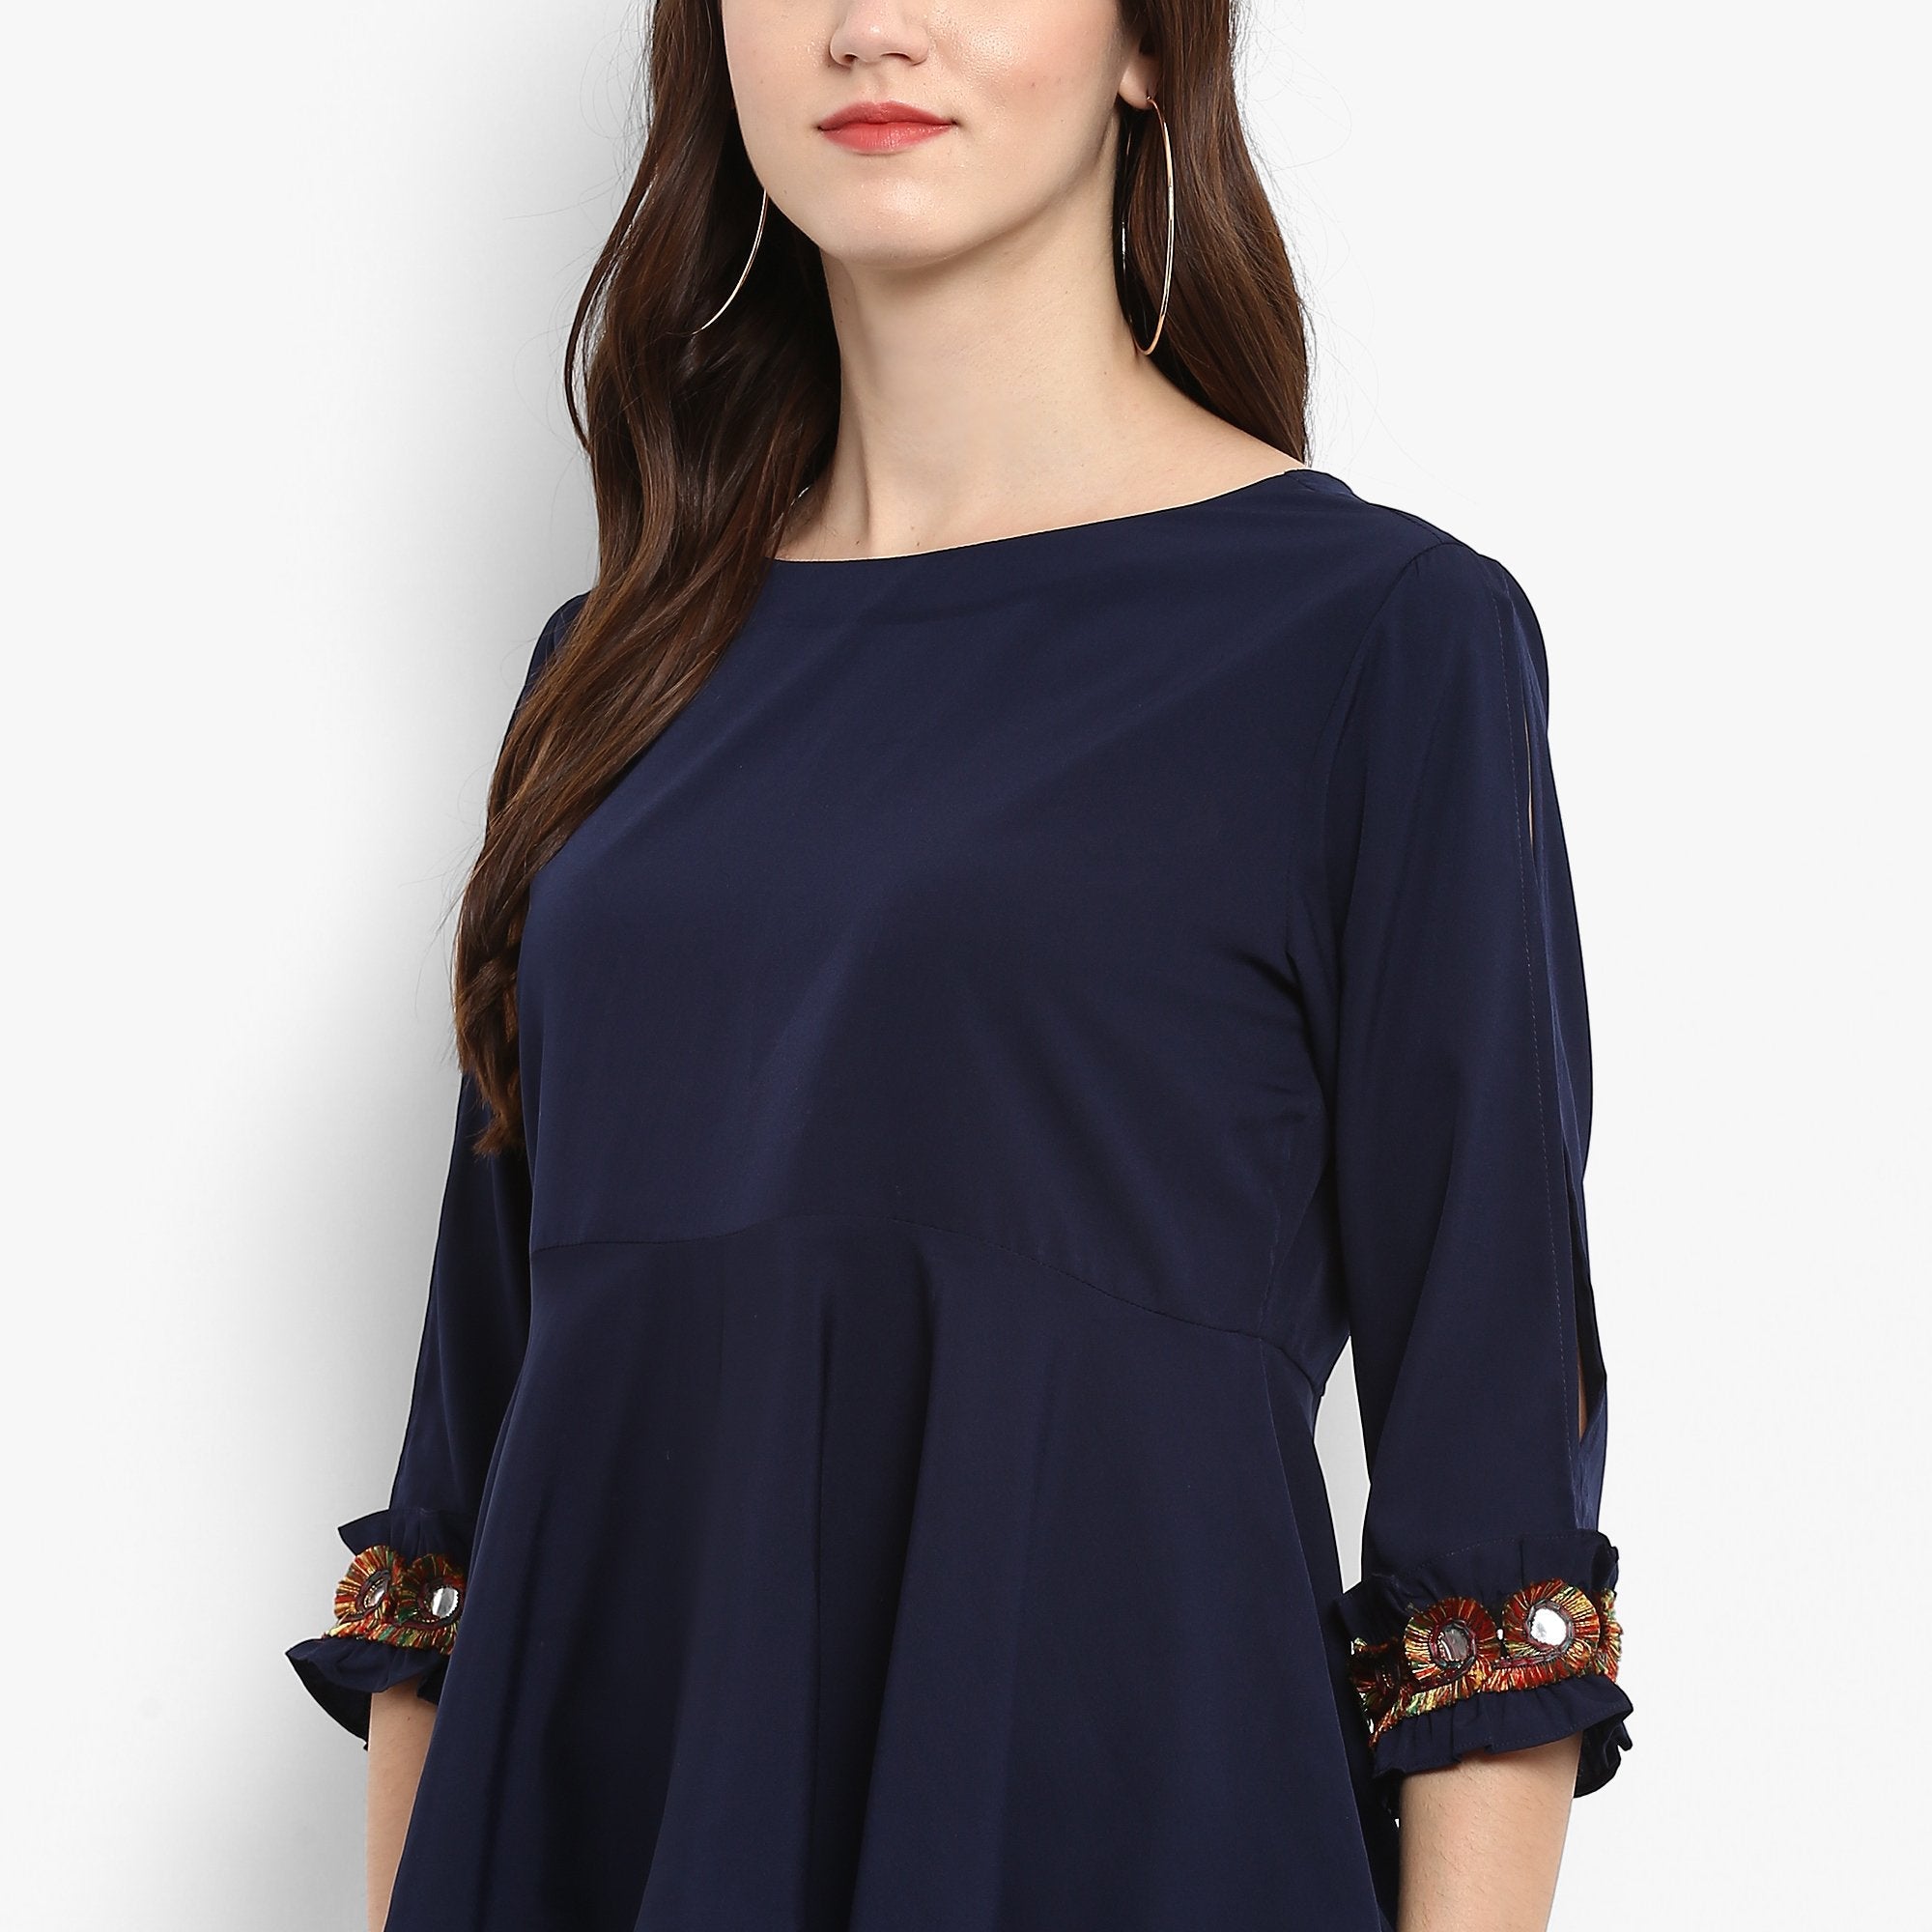 Women's Solid Peplum Top With Multi color Lace At The Sleeves - Pannkh